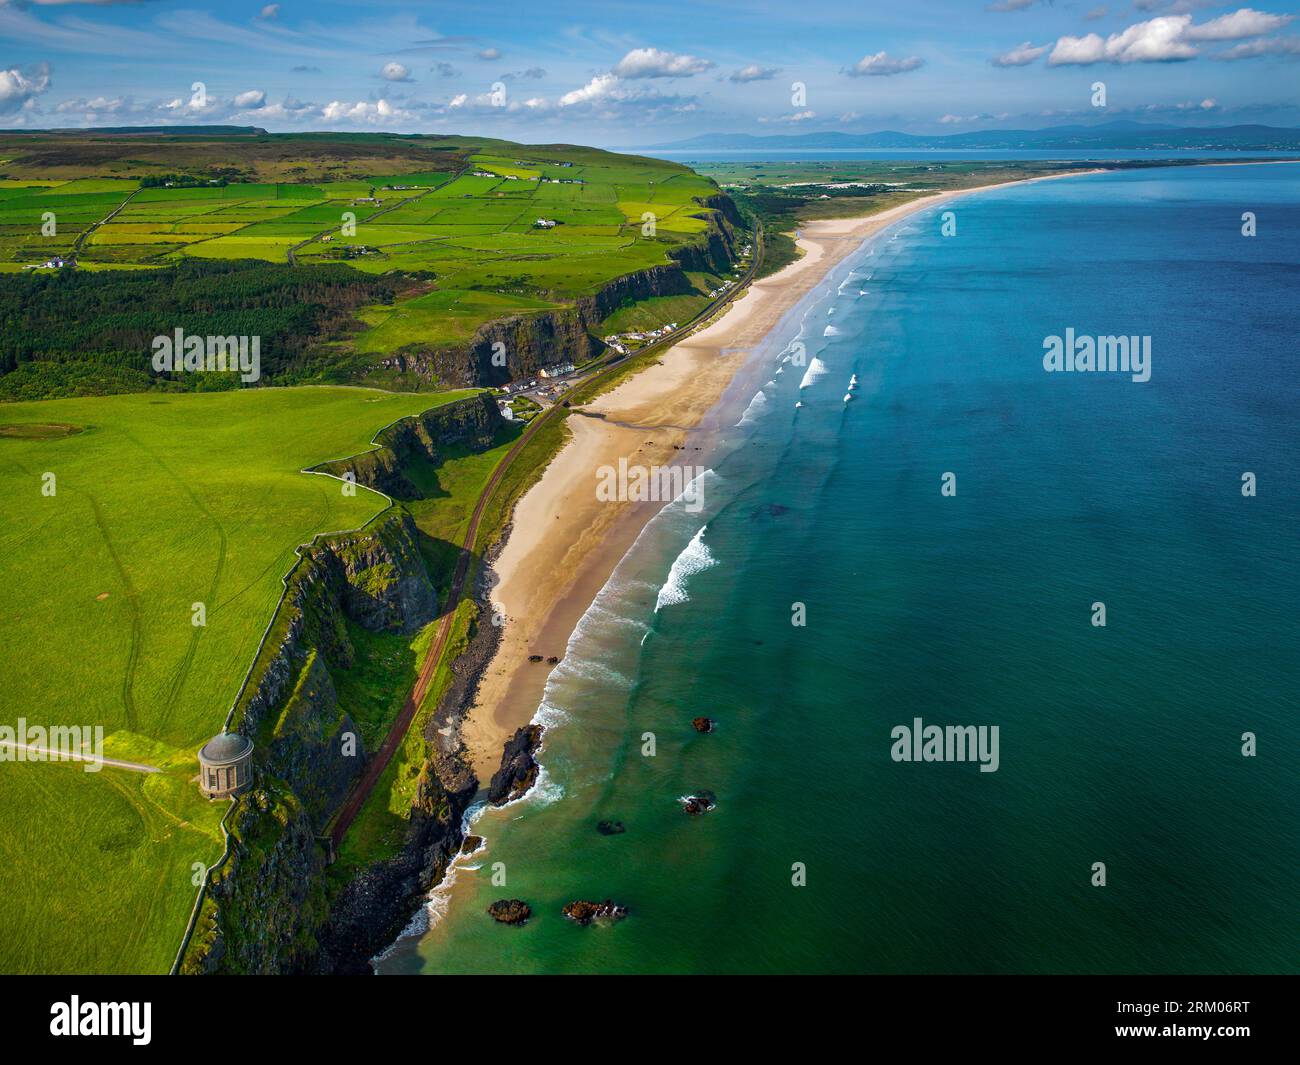 Aerial of Mussenden Temple, Downhill, County Londonderry, Irlande du Nord Banque D'Images